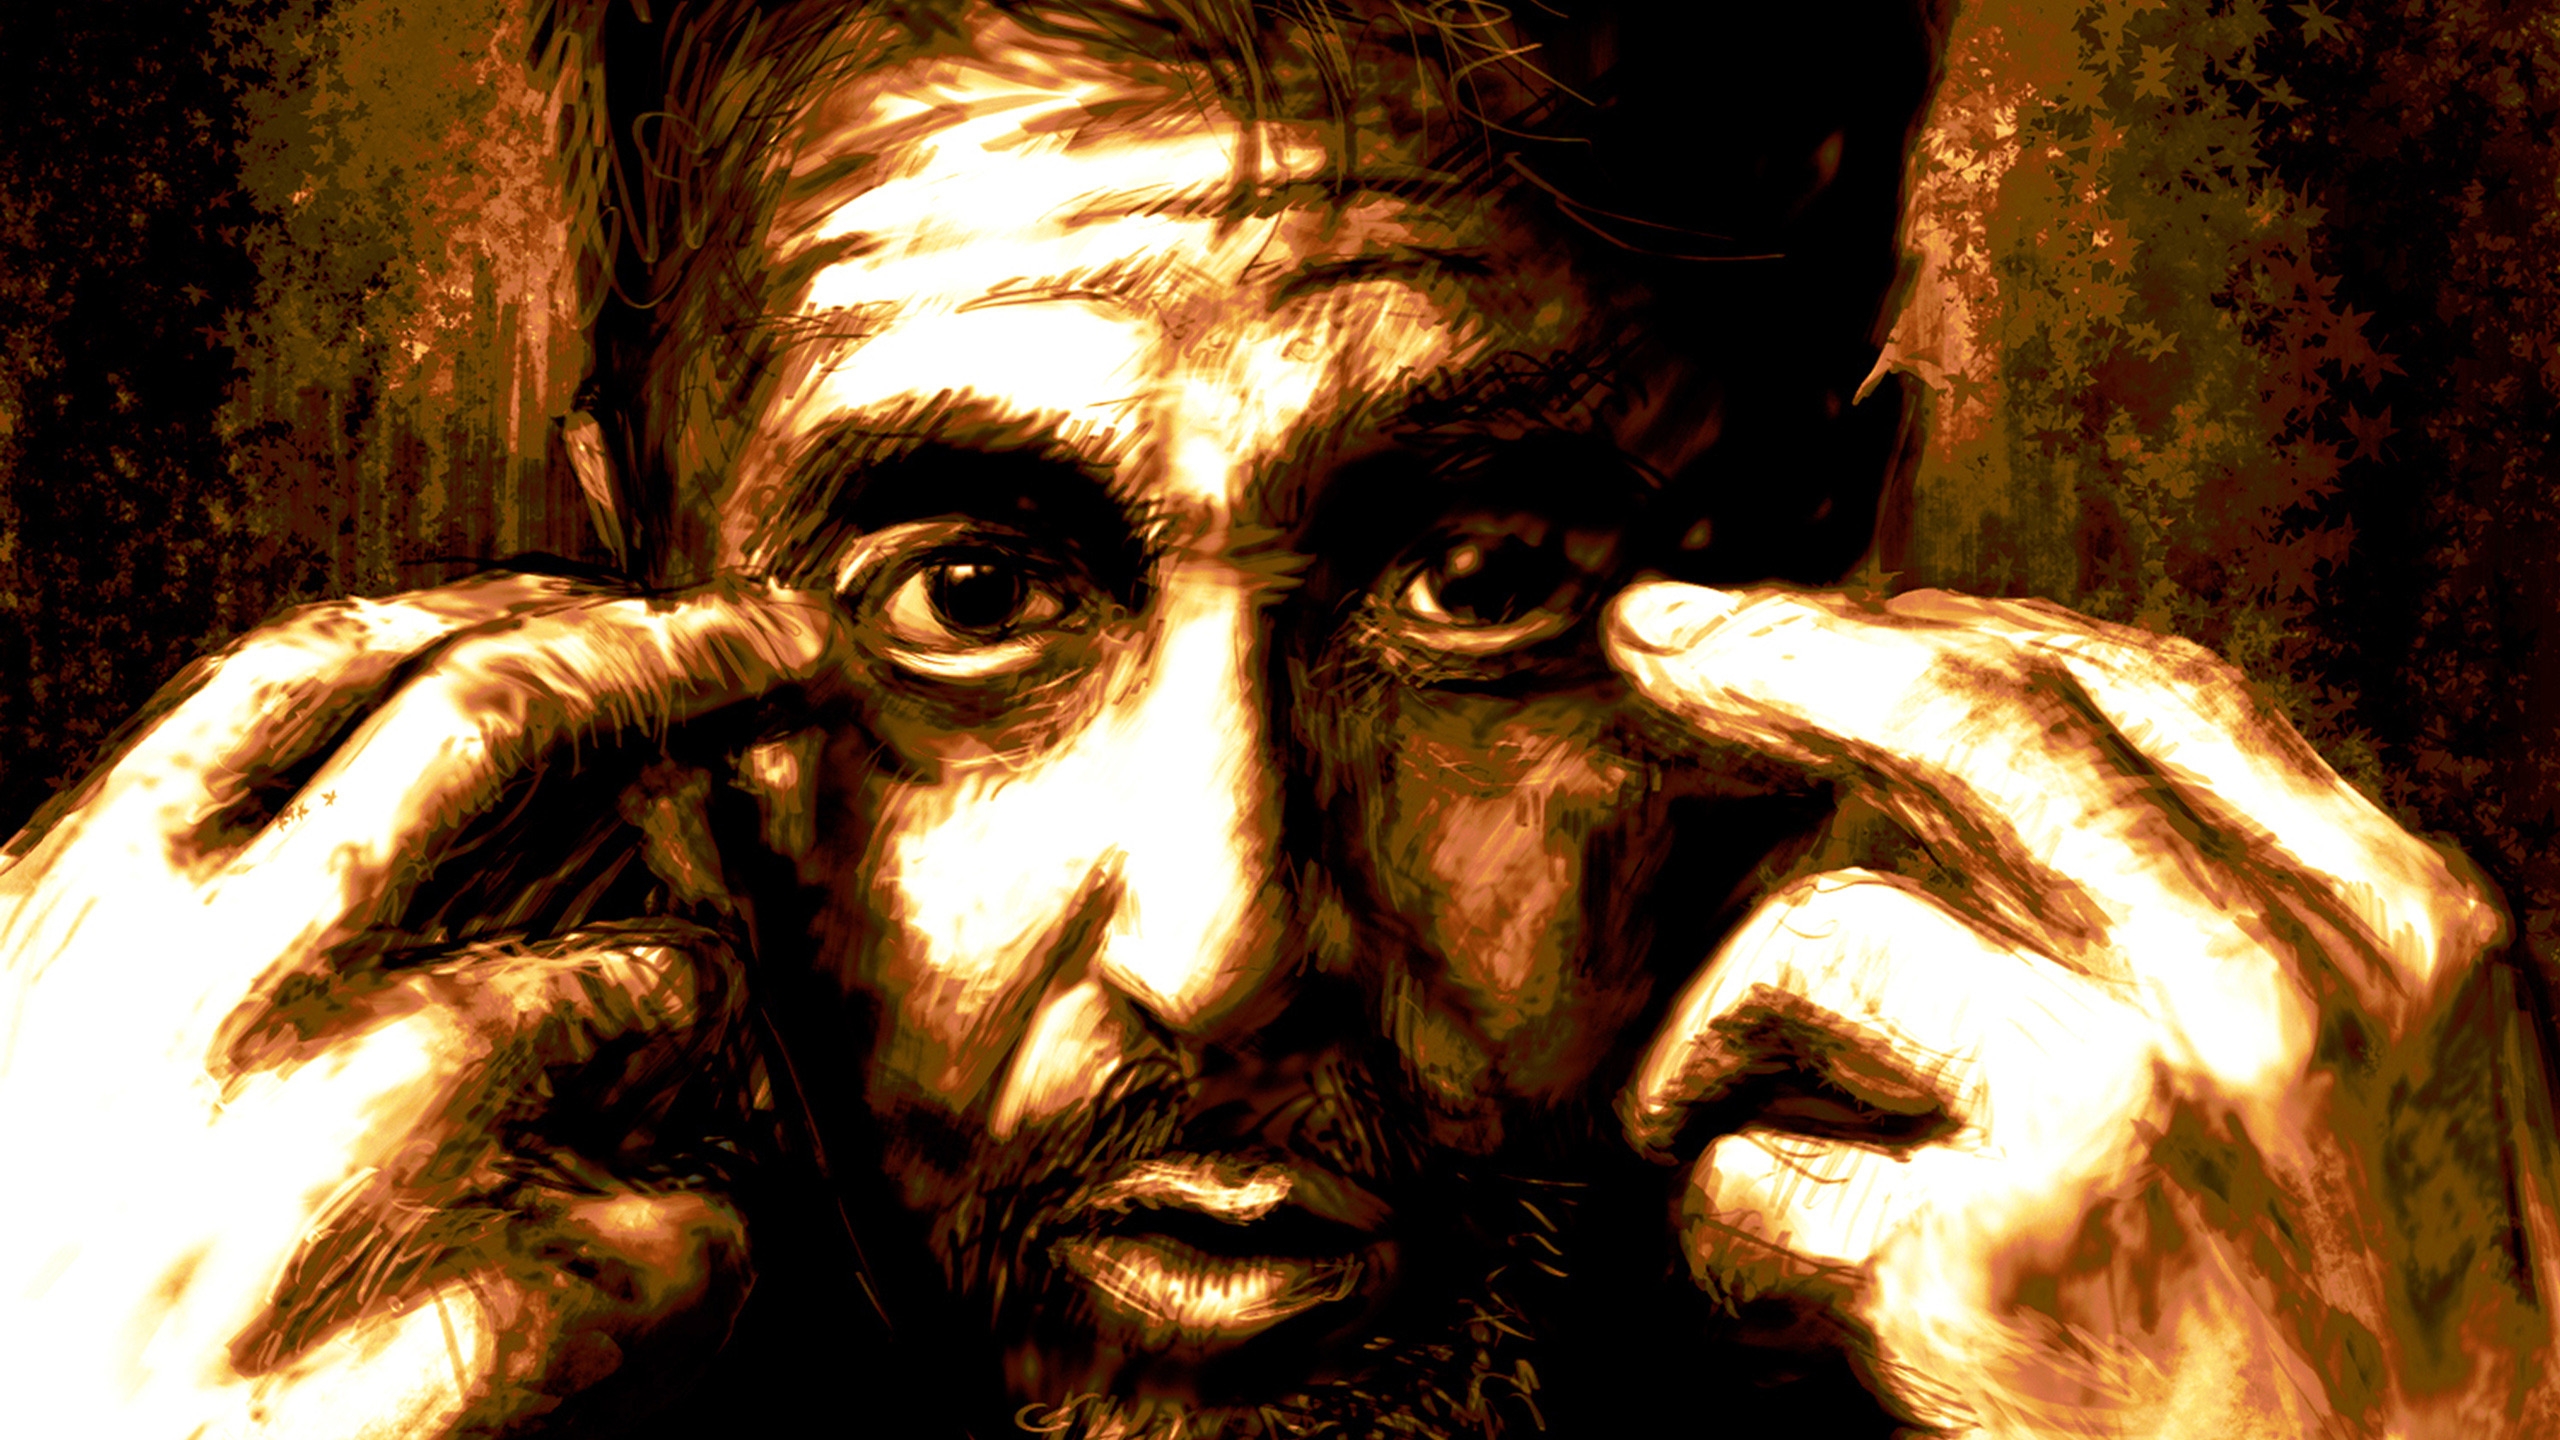 Al Pacino Drawing for 2560x1440 HDTV resolution